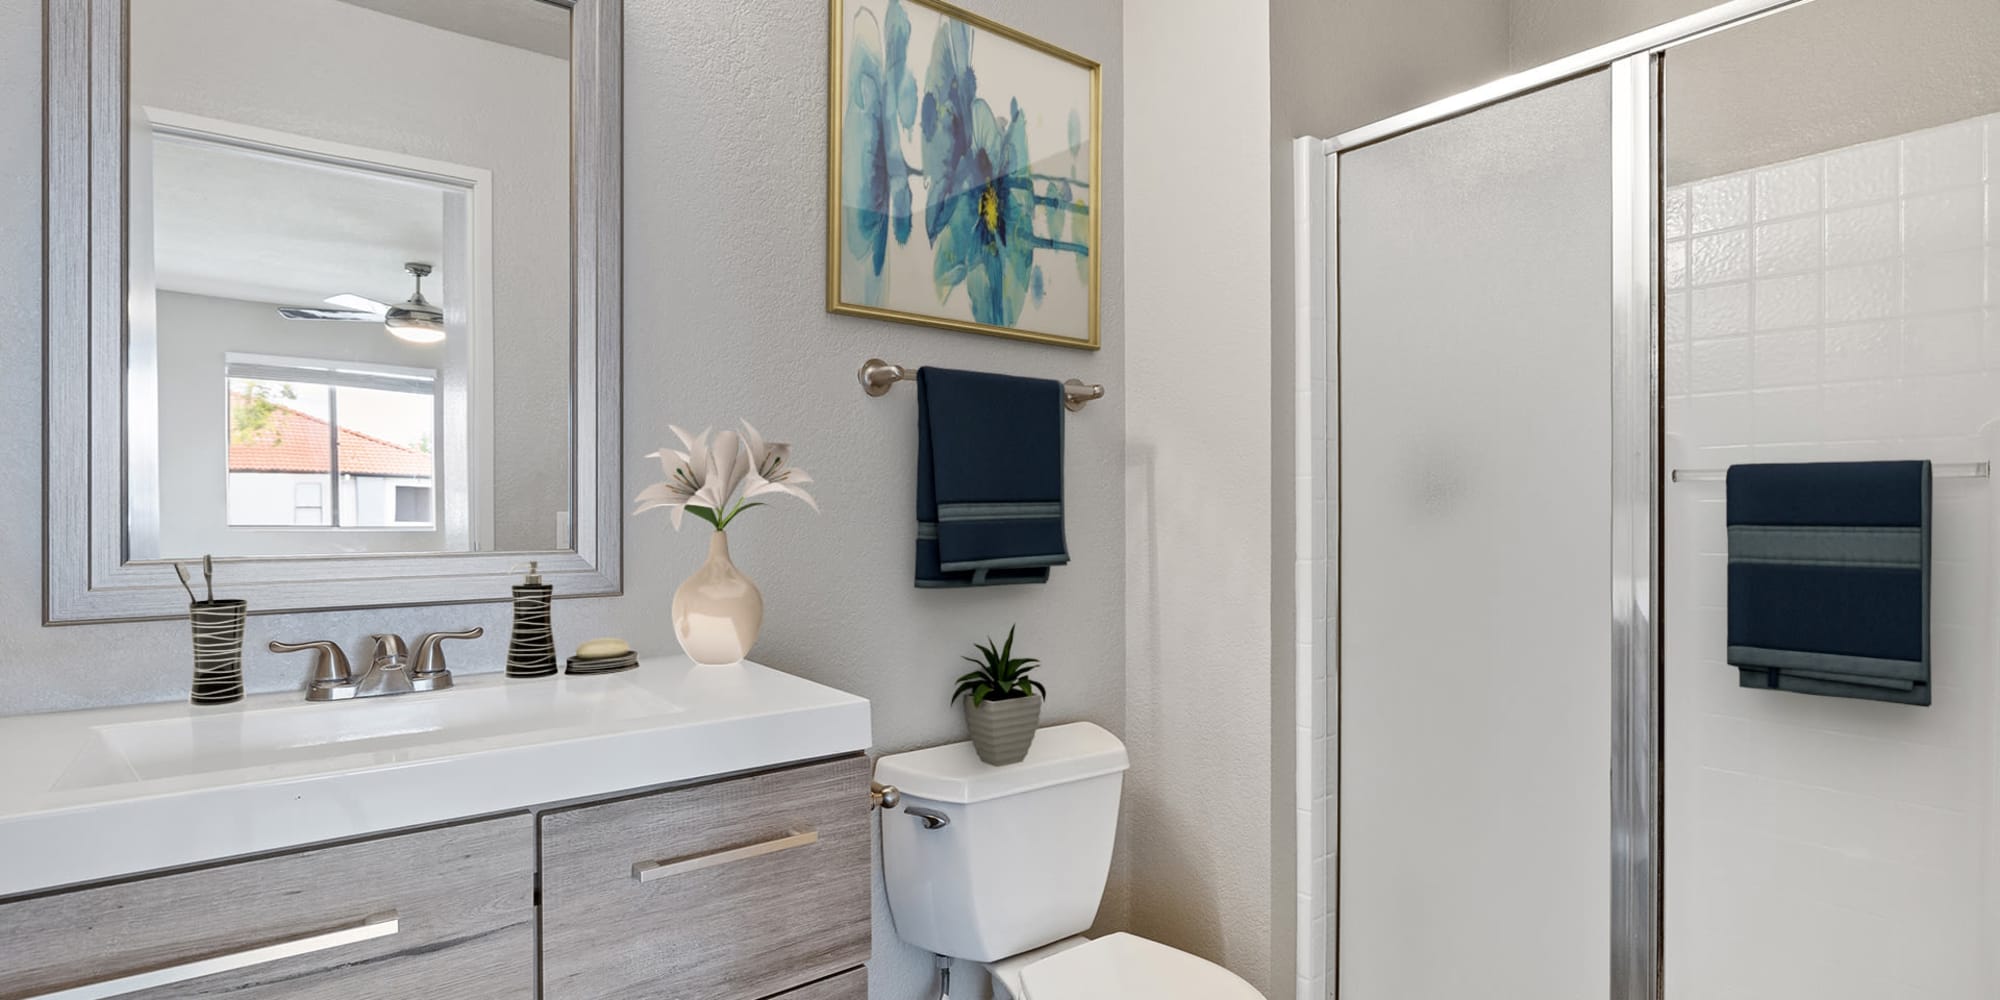 Bathroom with shower at Trails at Grand Terrace in Colton, California